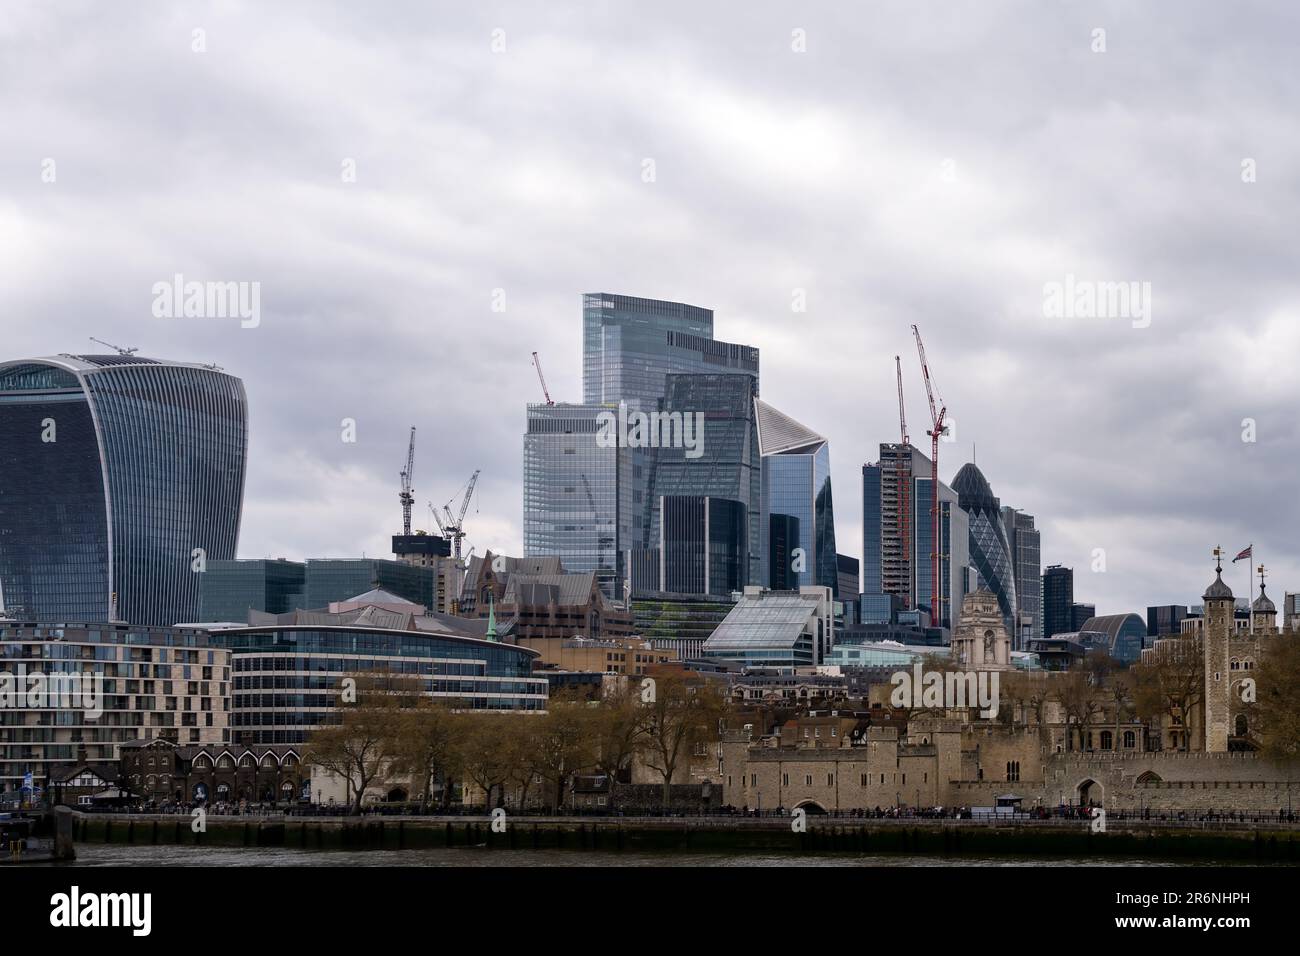 LONDON, ENGLAND - APRIL 18th, 2023: View of the Tower of London and the skyscrapers of City of London behind it on a cloudy spring day Stock Photo